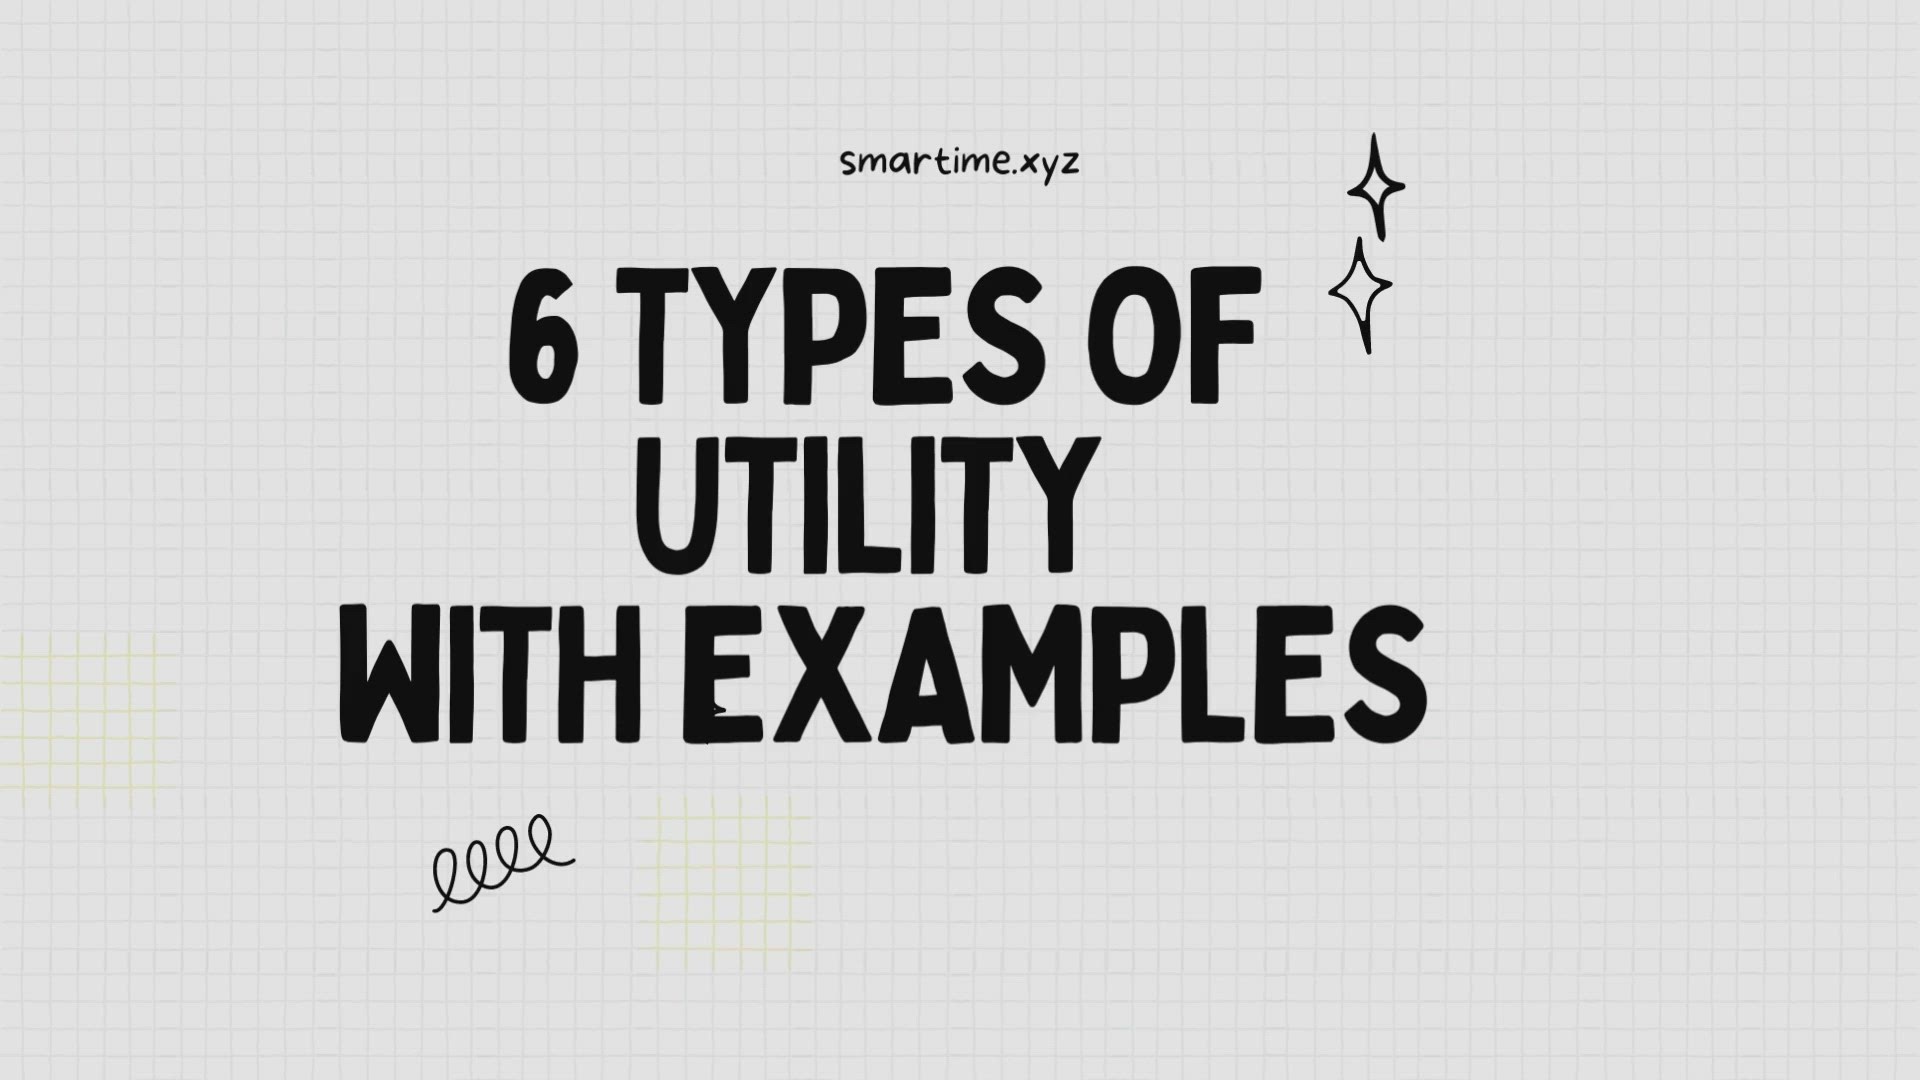 'Video thumbnail for 6 Types of Utility with Examples video '